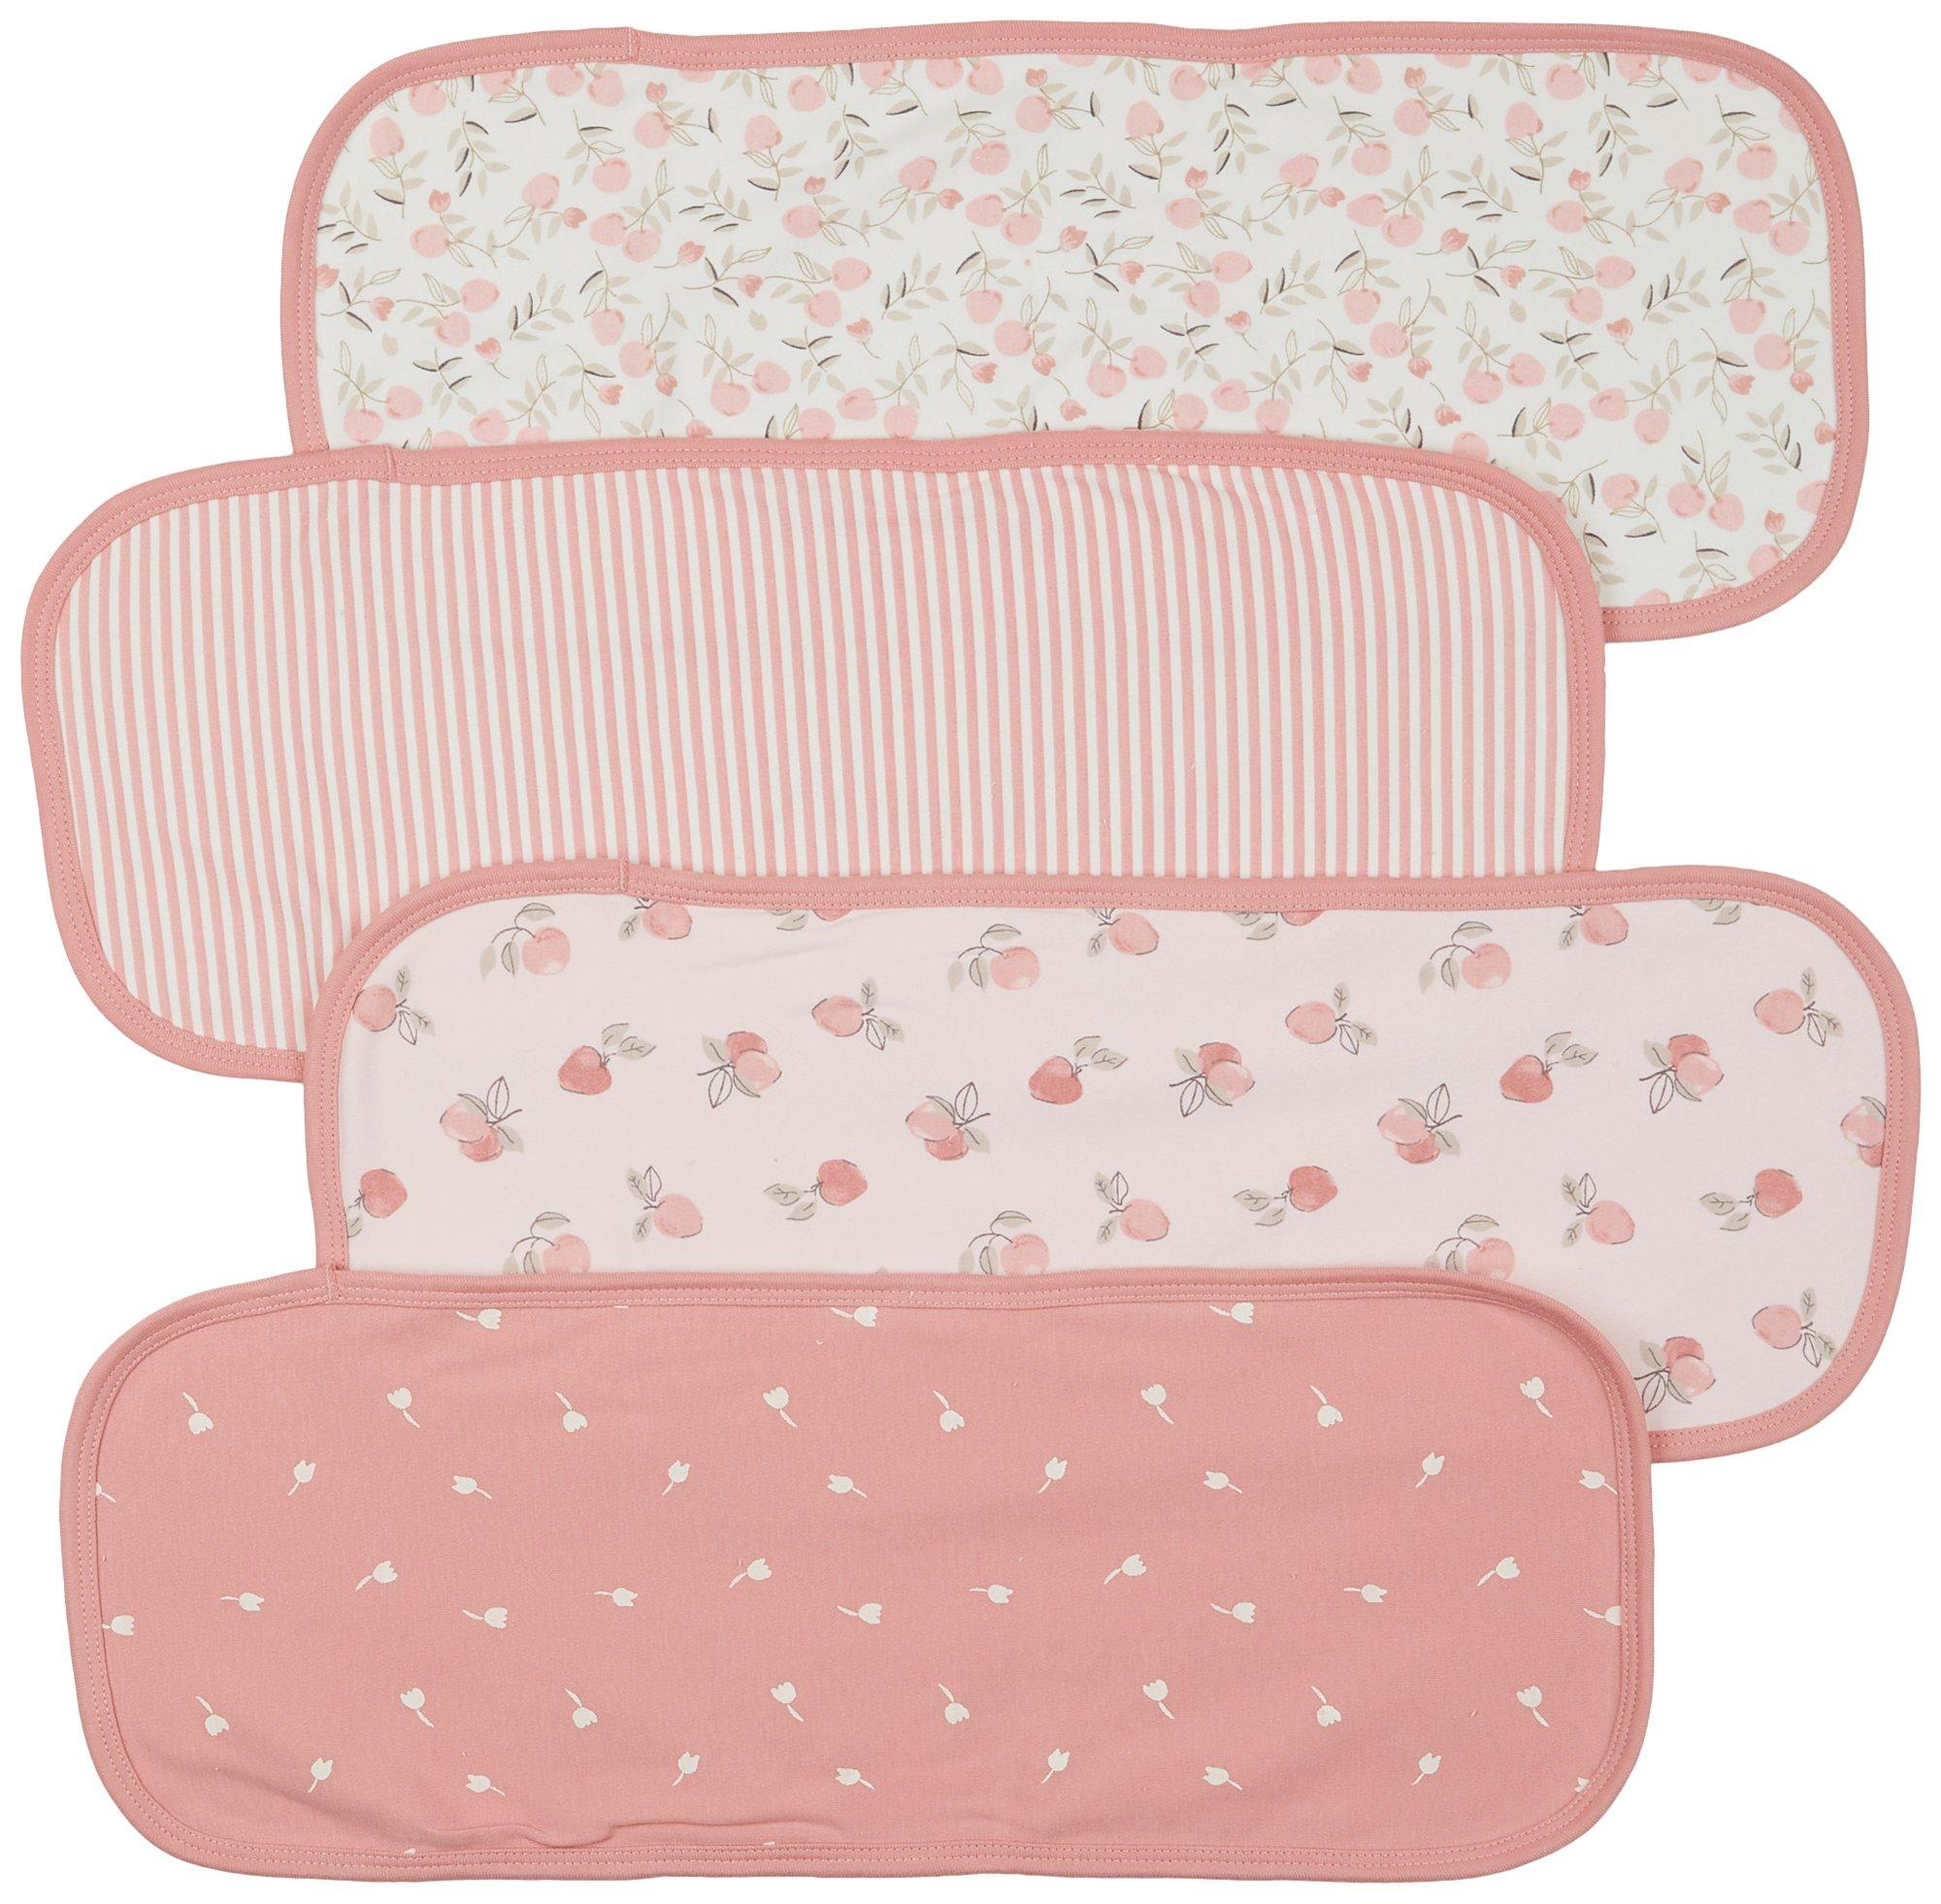 Baby 4 Pk Floral Terry Lined Burp Cloths